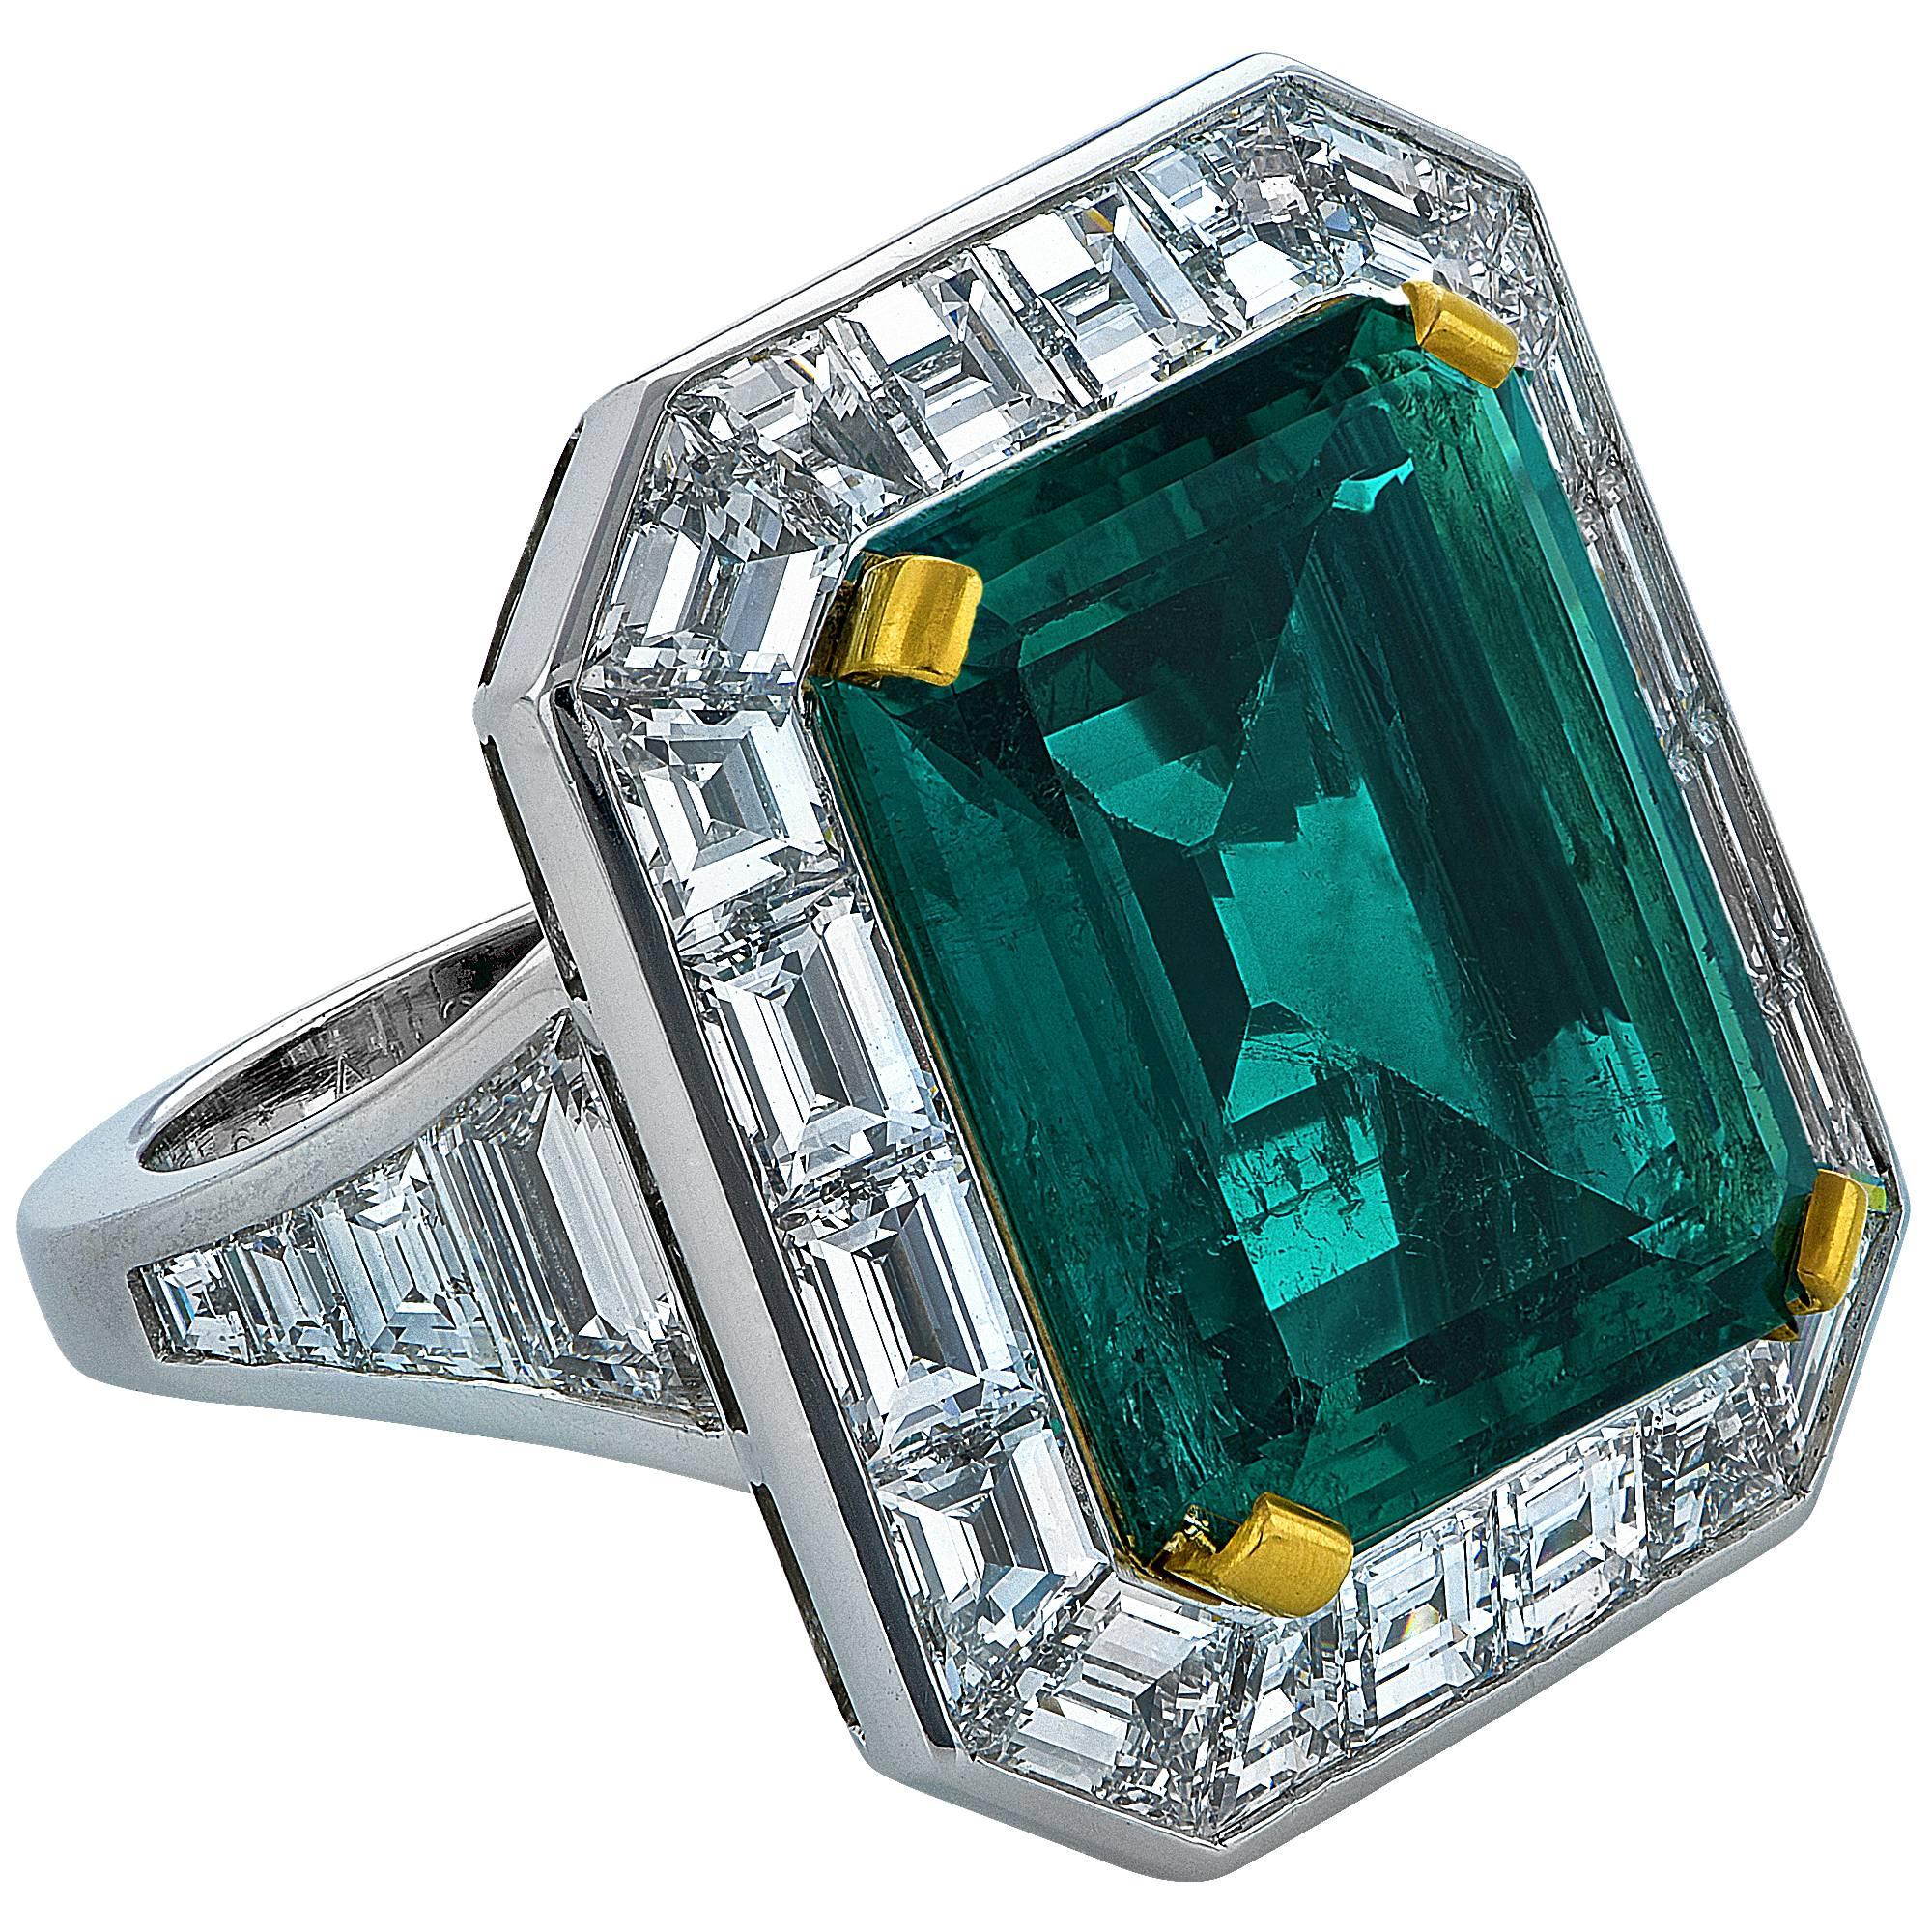 Custom handmade platinum ring starring a 10.10ct deep, vibrant green emerald with a Columbia origin, accompanied by an AGL report stating minor traditional. This rare emerald is surrounded by 16 custom wide cut baguettes weighing 5.55cts D-E color